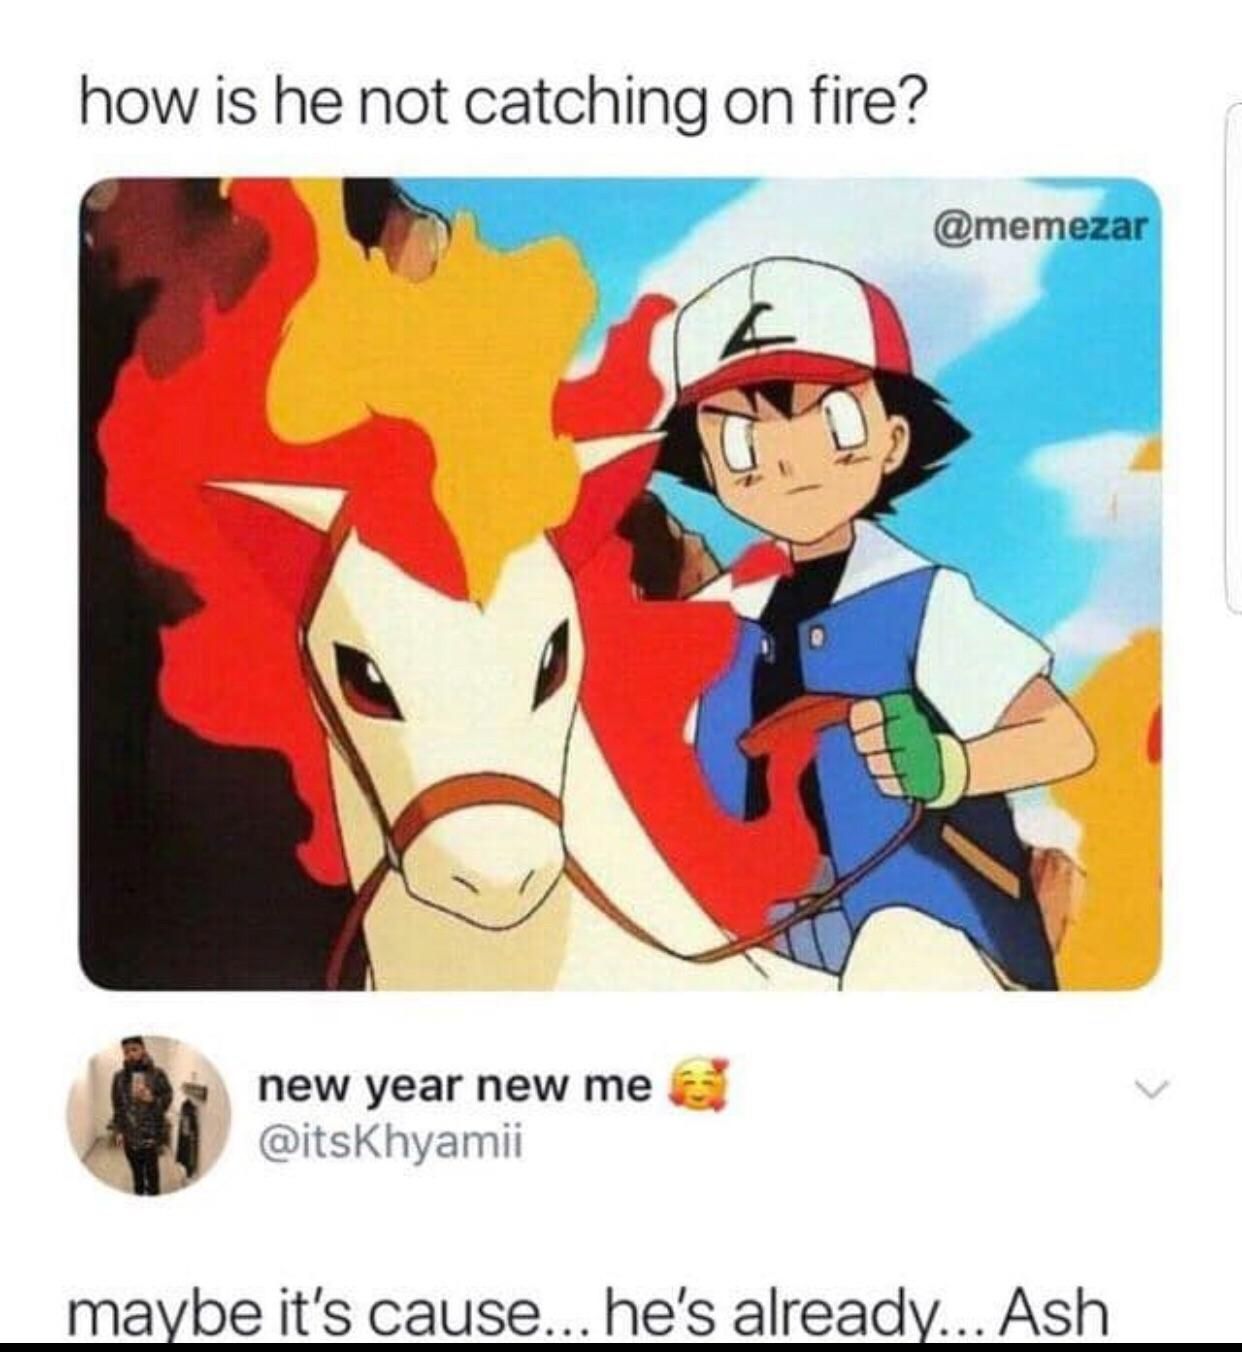 Because his name is Ash